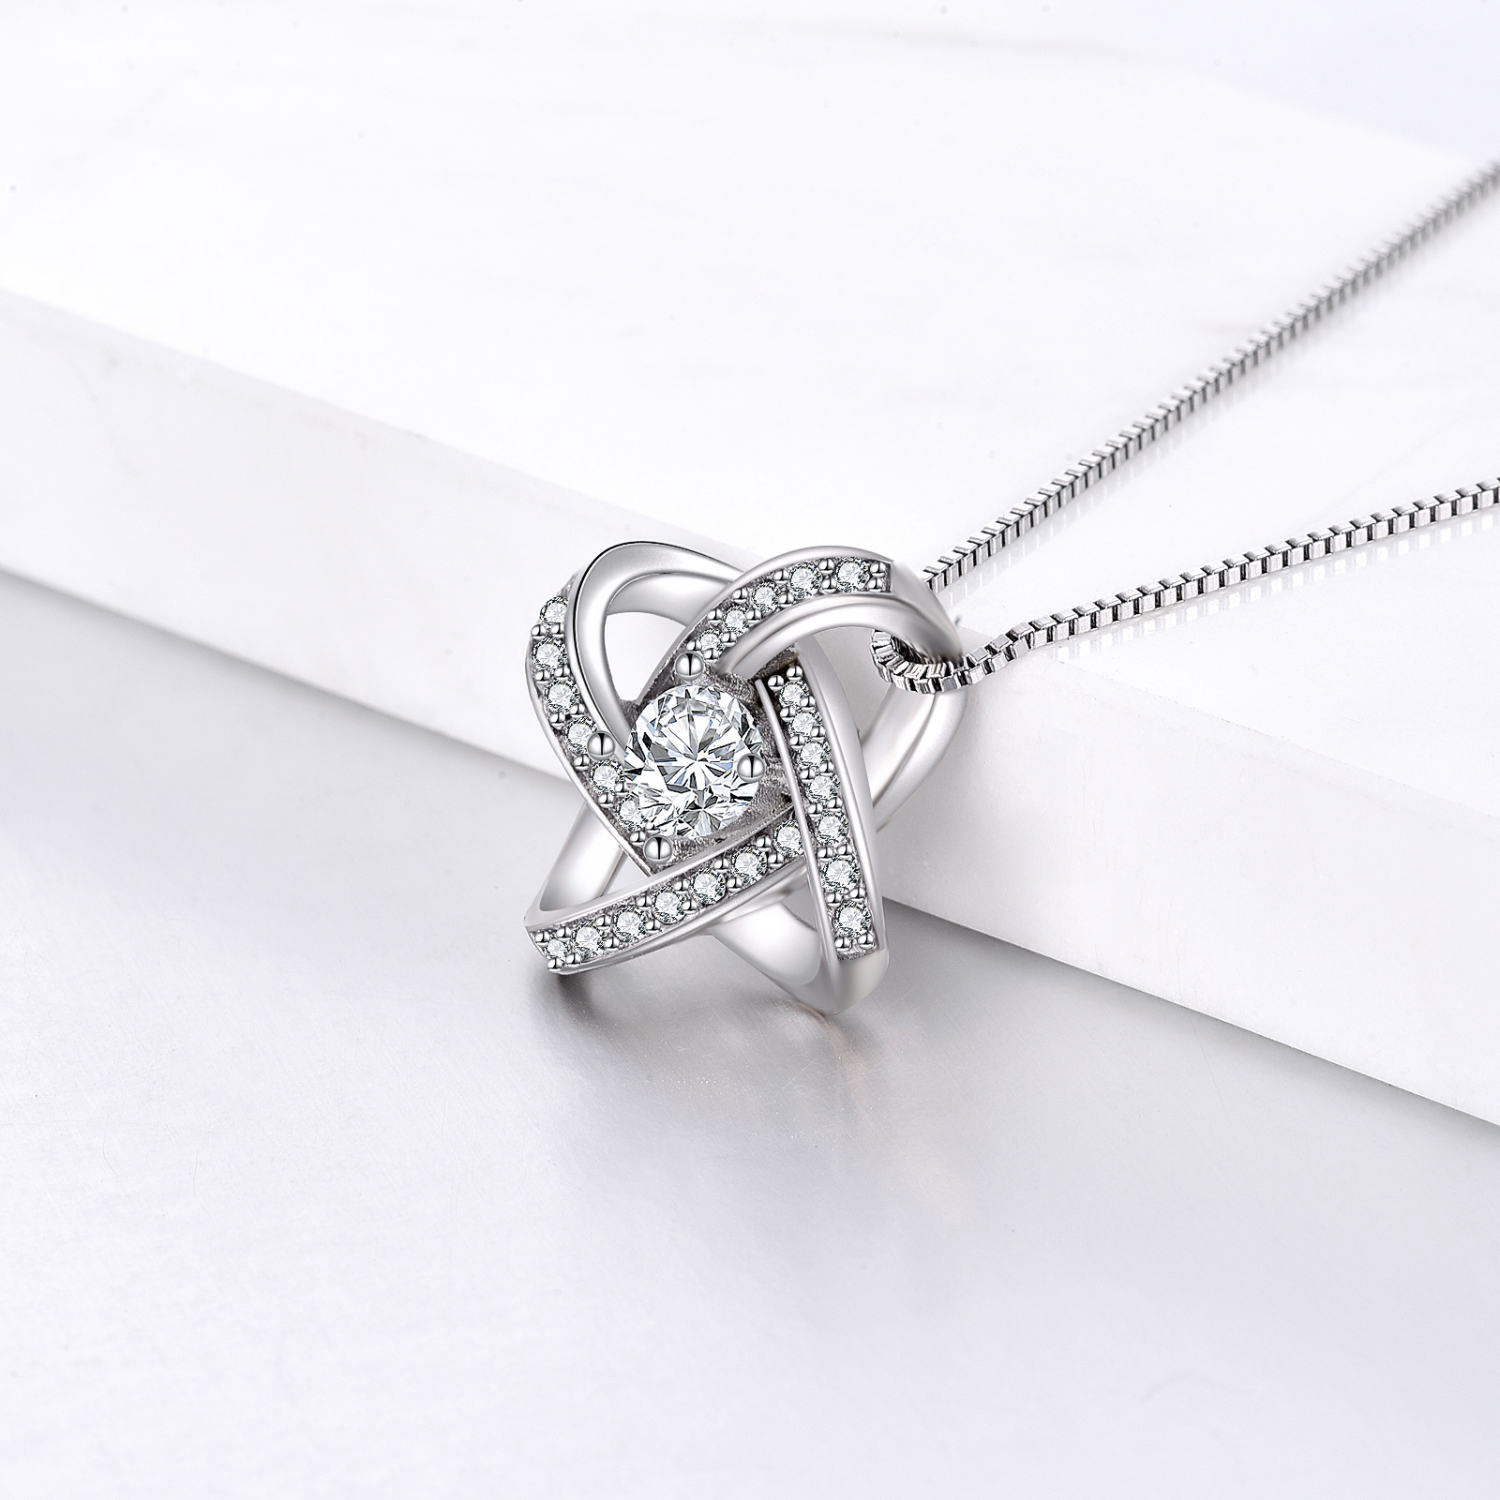 Personalized Necklaces + Message Cards - Love Knot Necklace With Personalized Photo Card 